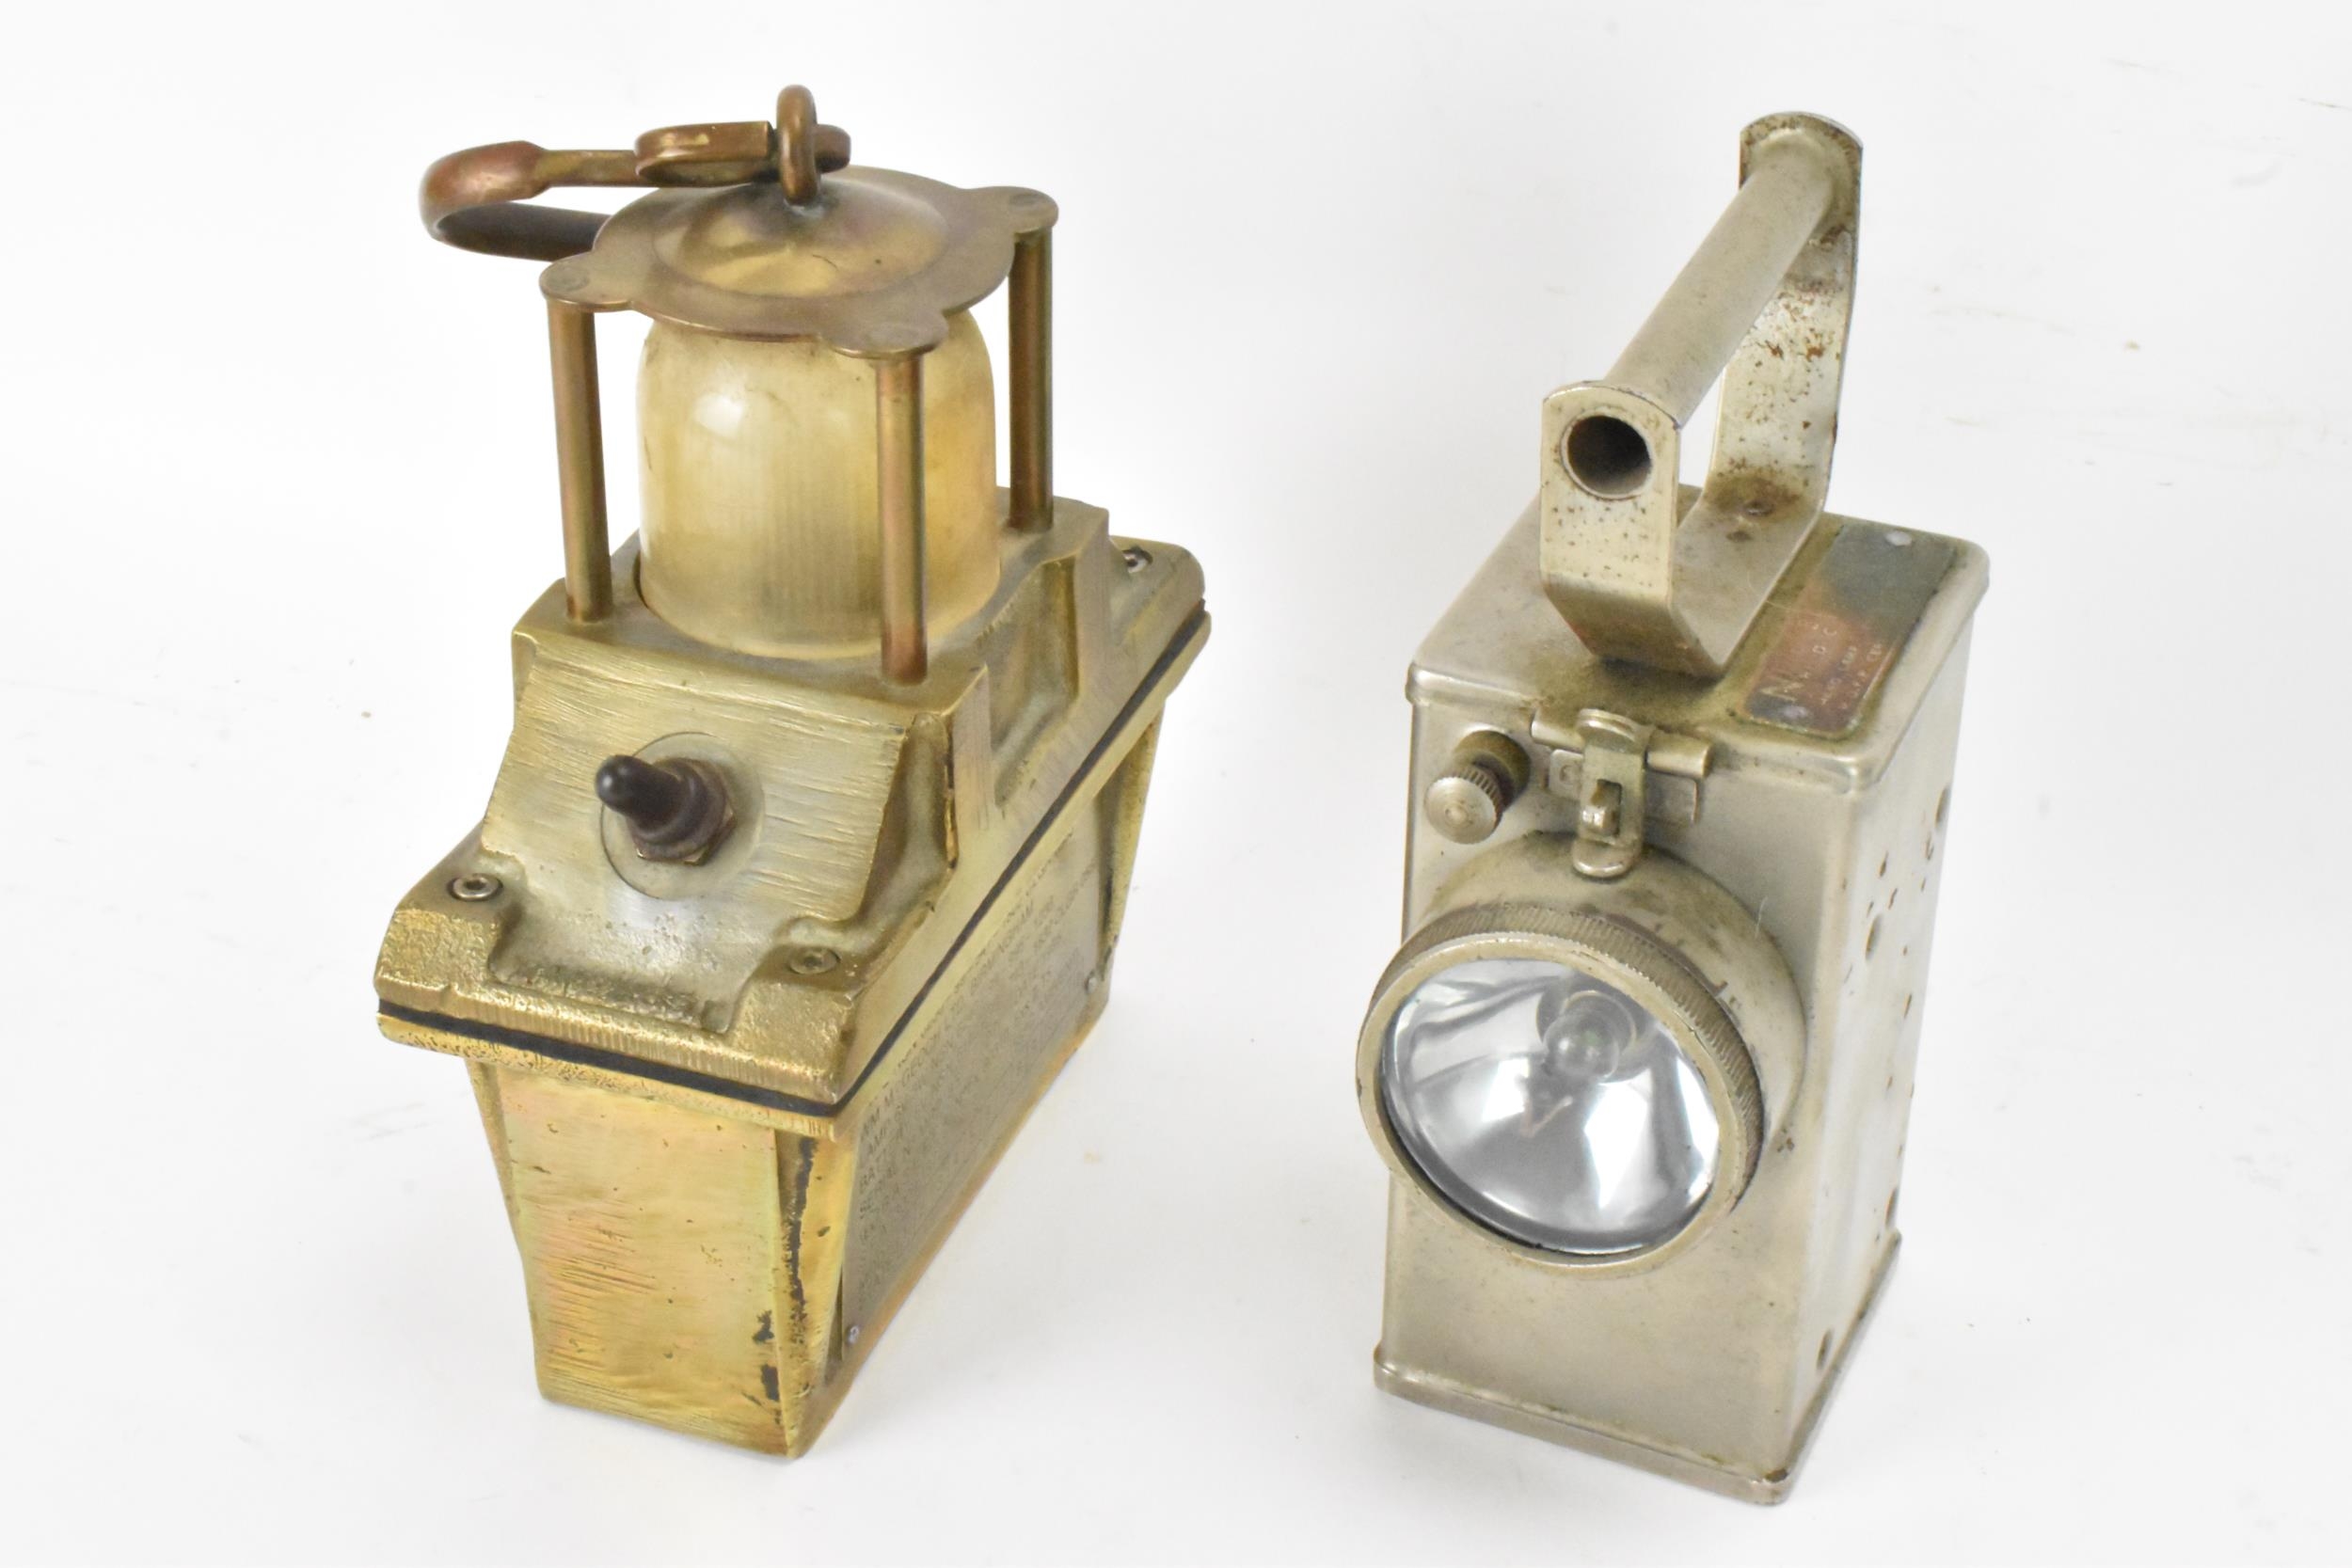 A late 20th century explosion proof safety hand lamp, produced by William McGeoch Ltd, Birmingham, - Image 3 of 4